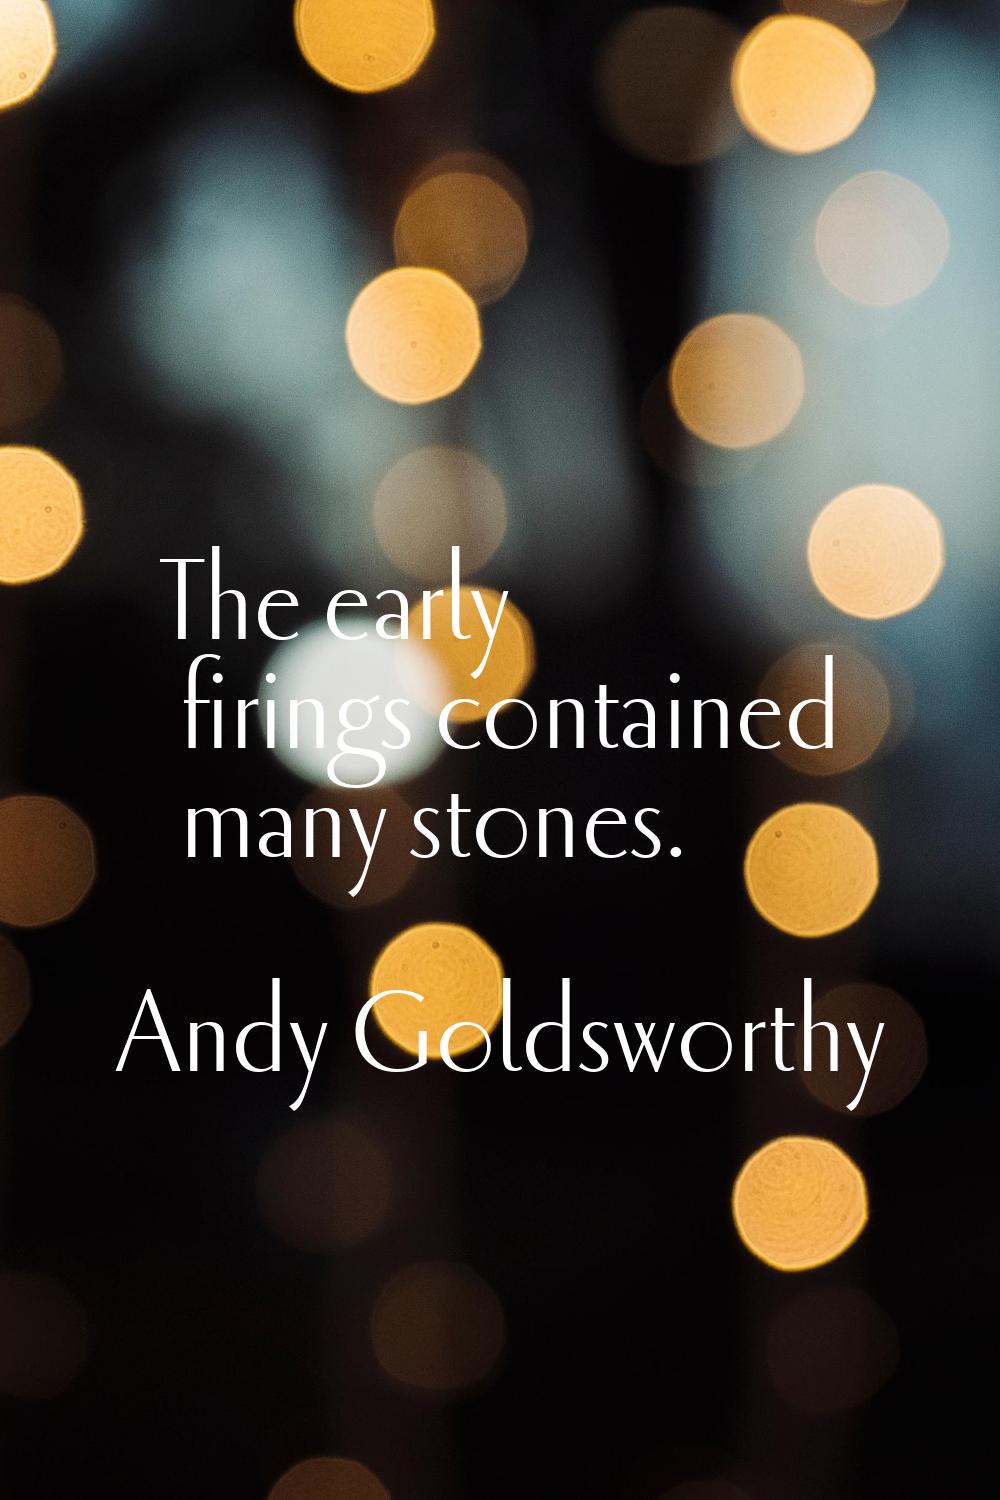 The early firings contained many stones.